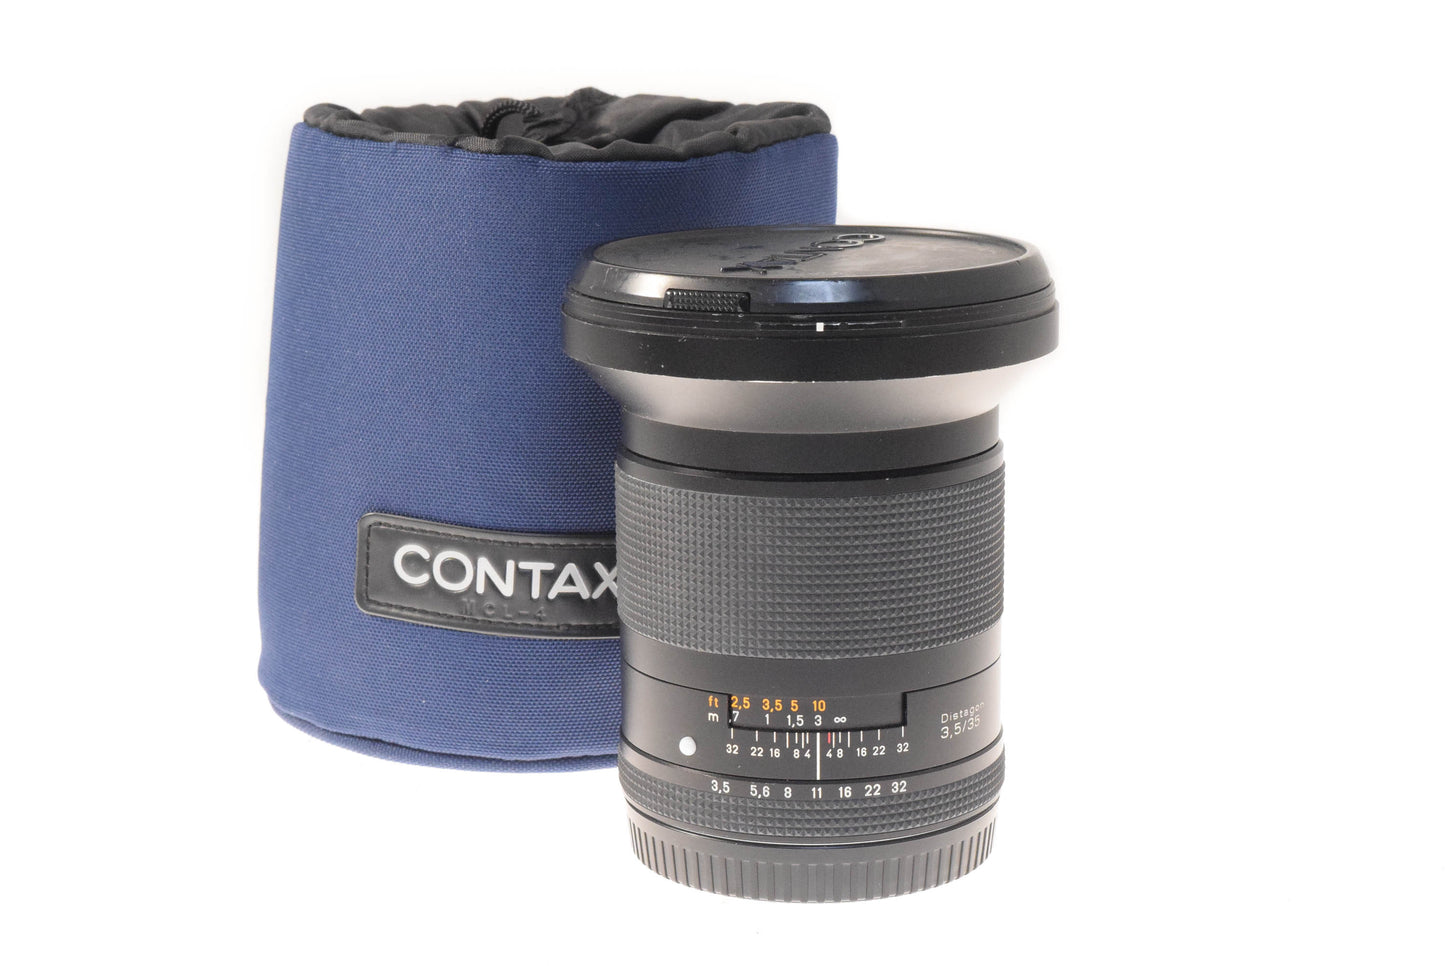 Contax 35mm f3.5 Distagon T* - Lens